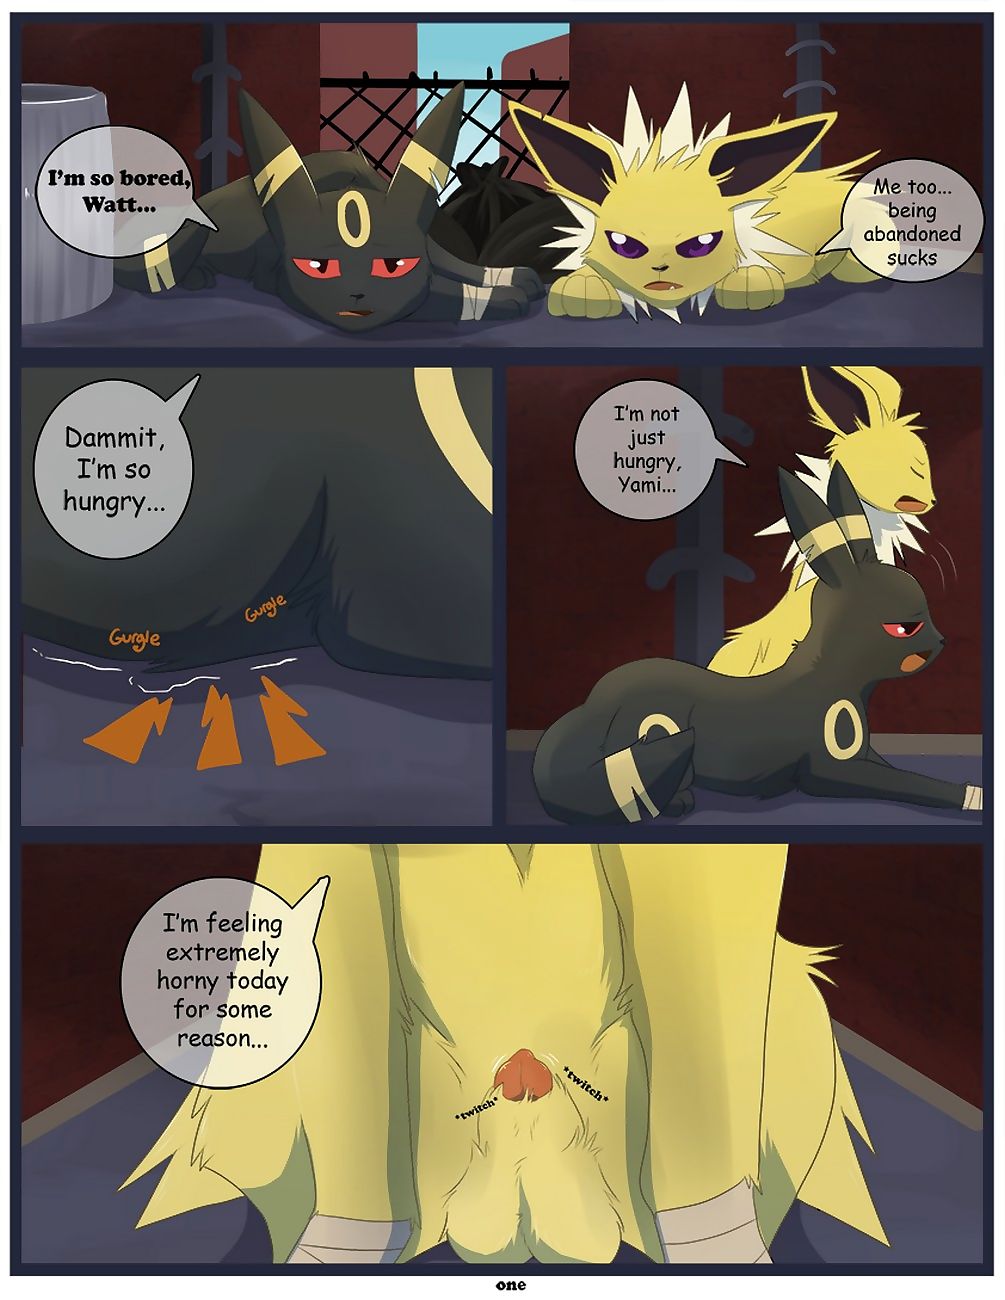 Heated Trouble! - part 2 page 1